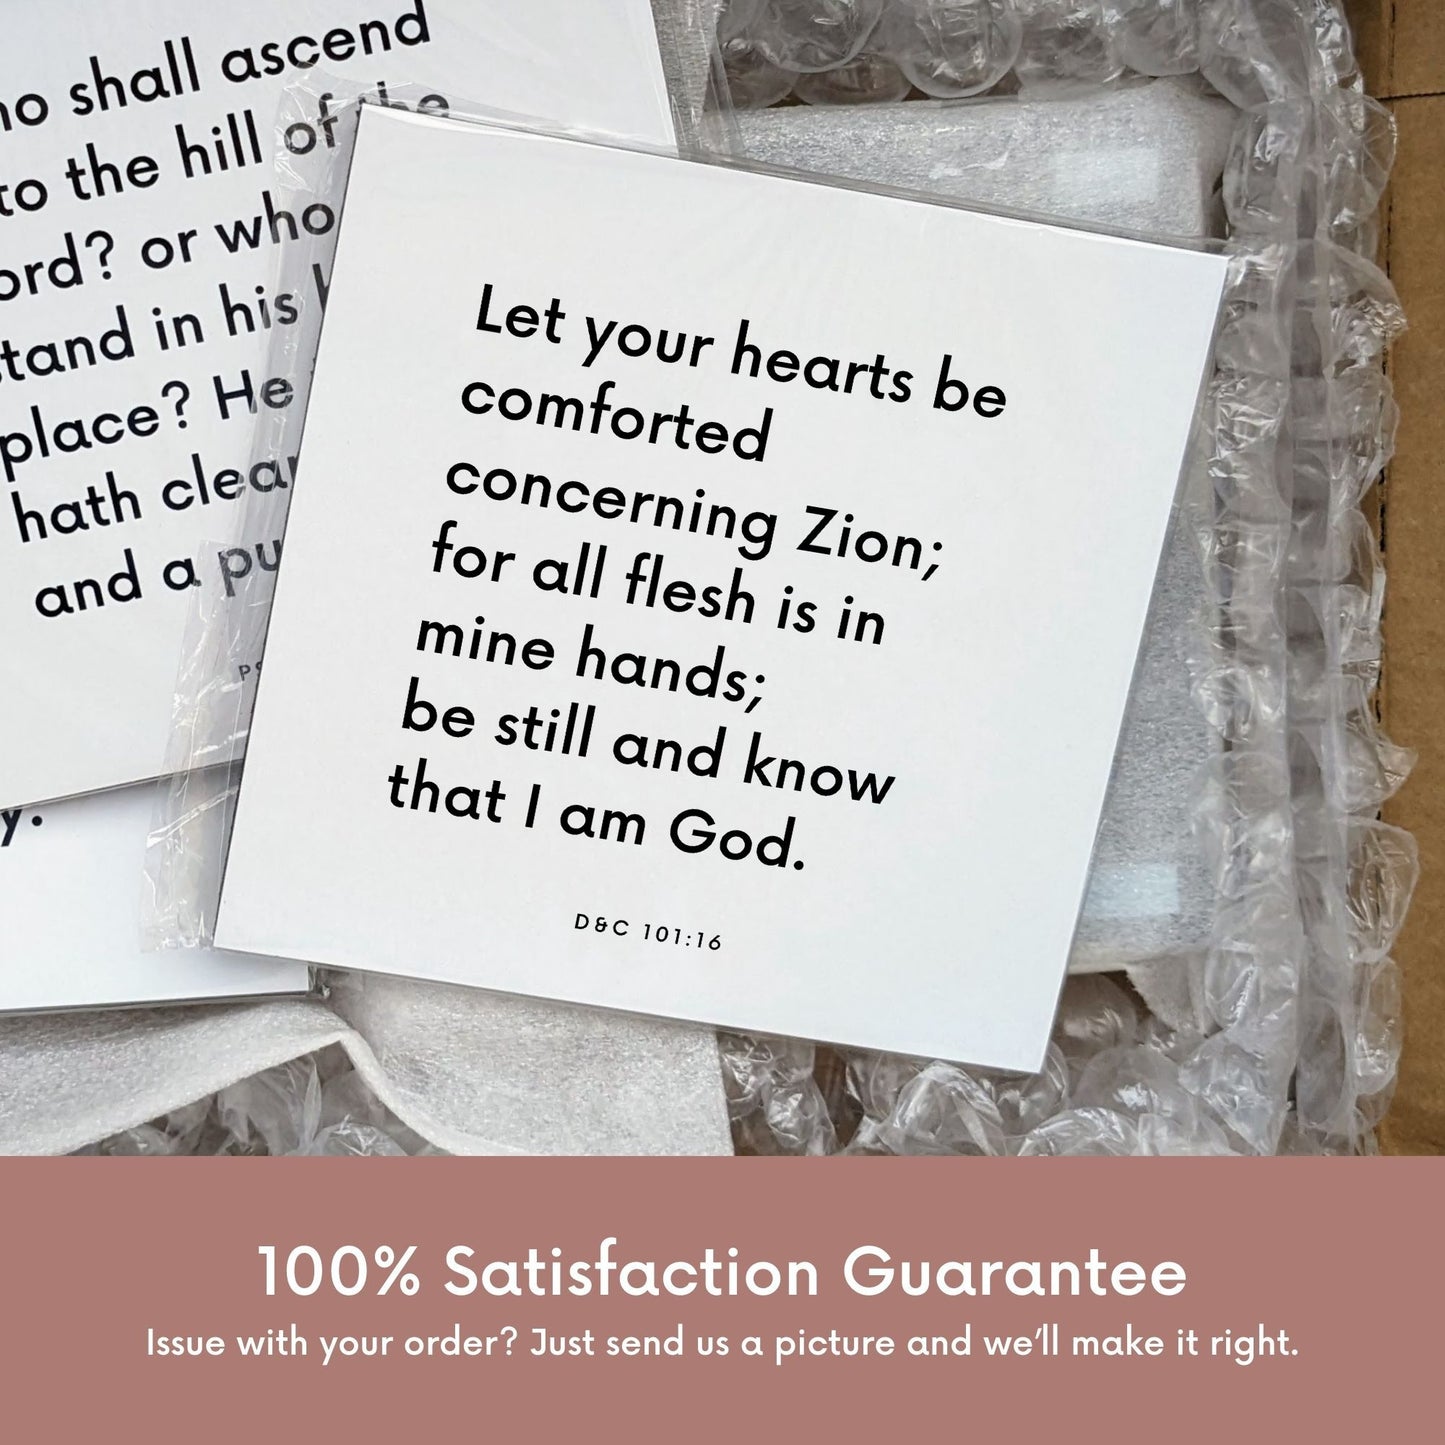 Shipping materials for scripture tile of D&C 101:16 - "Let your hearts be comforted concerning Zion"